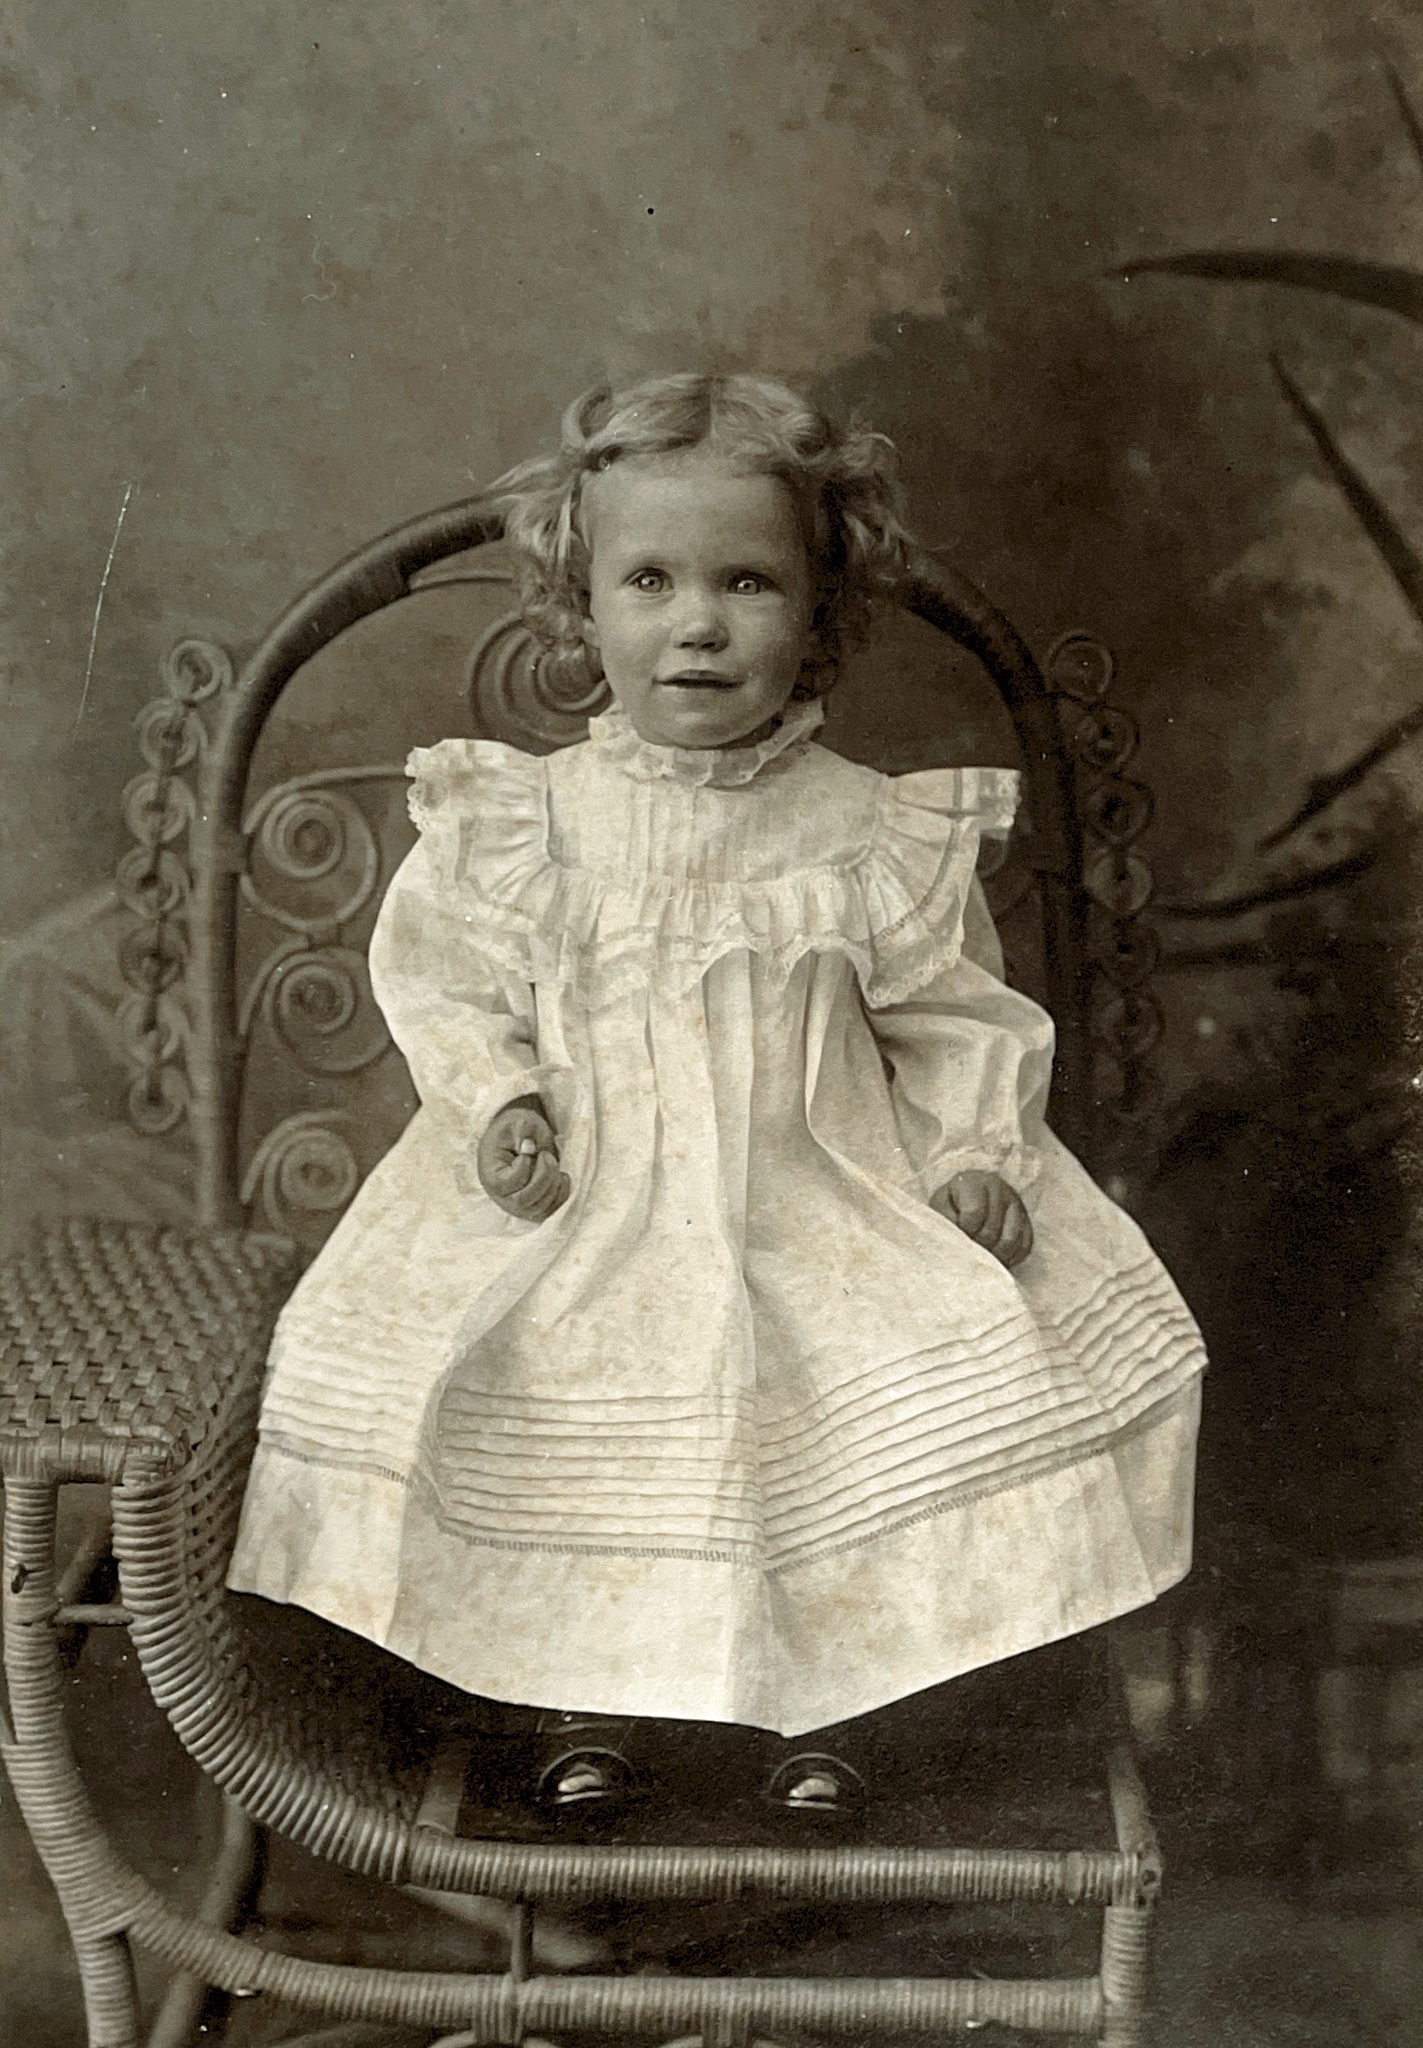 Josephine Klueg at 1 year and 5 months February 1905